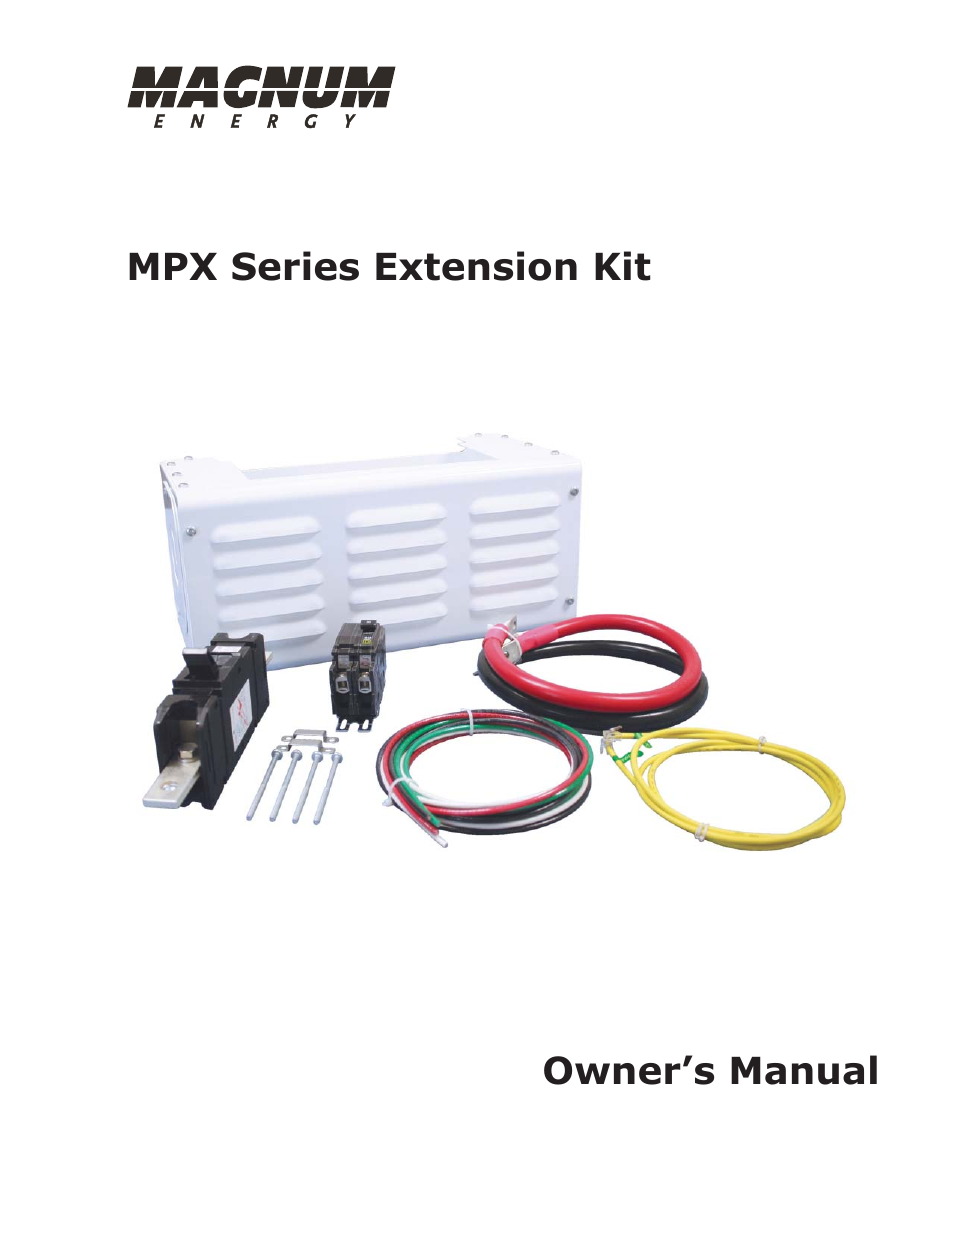 MP Extension Box (MPX Series)